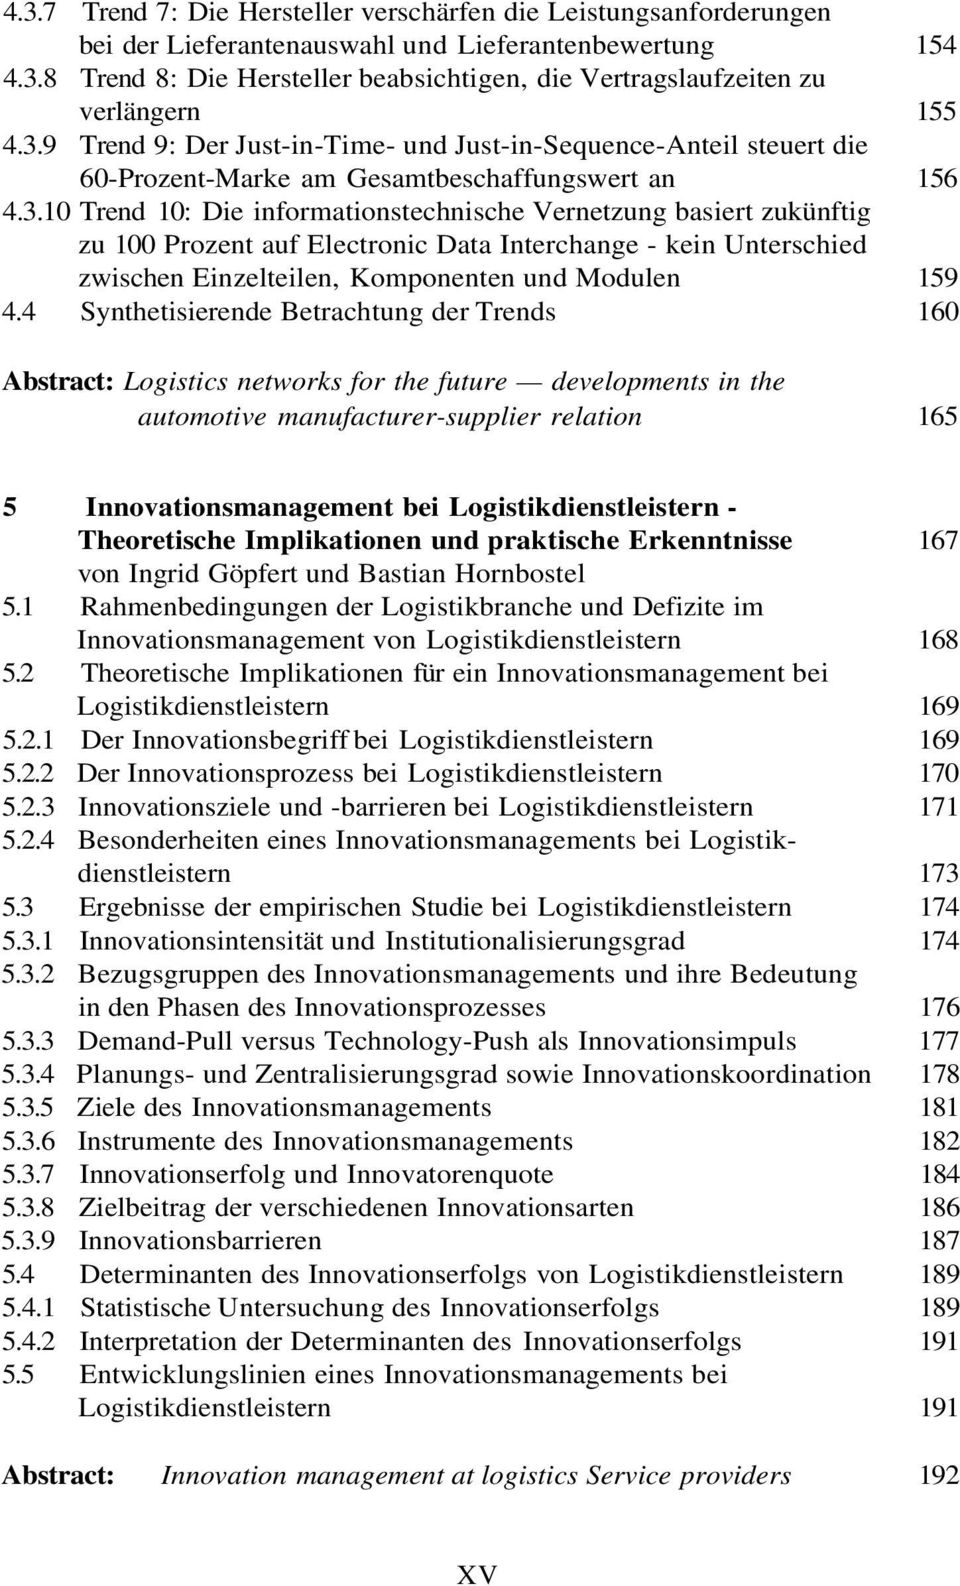 4 Synthetisierende Betrachtung der Trends 160 Abstract: Logistics networks for the future developments in the automotive manufacturer-supplier relation 165 5 Innovationsmanagement bei